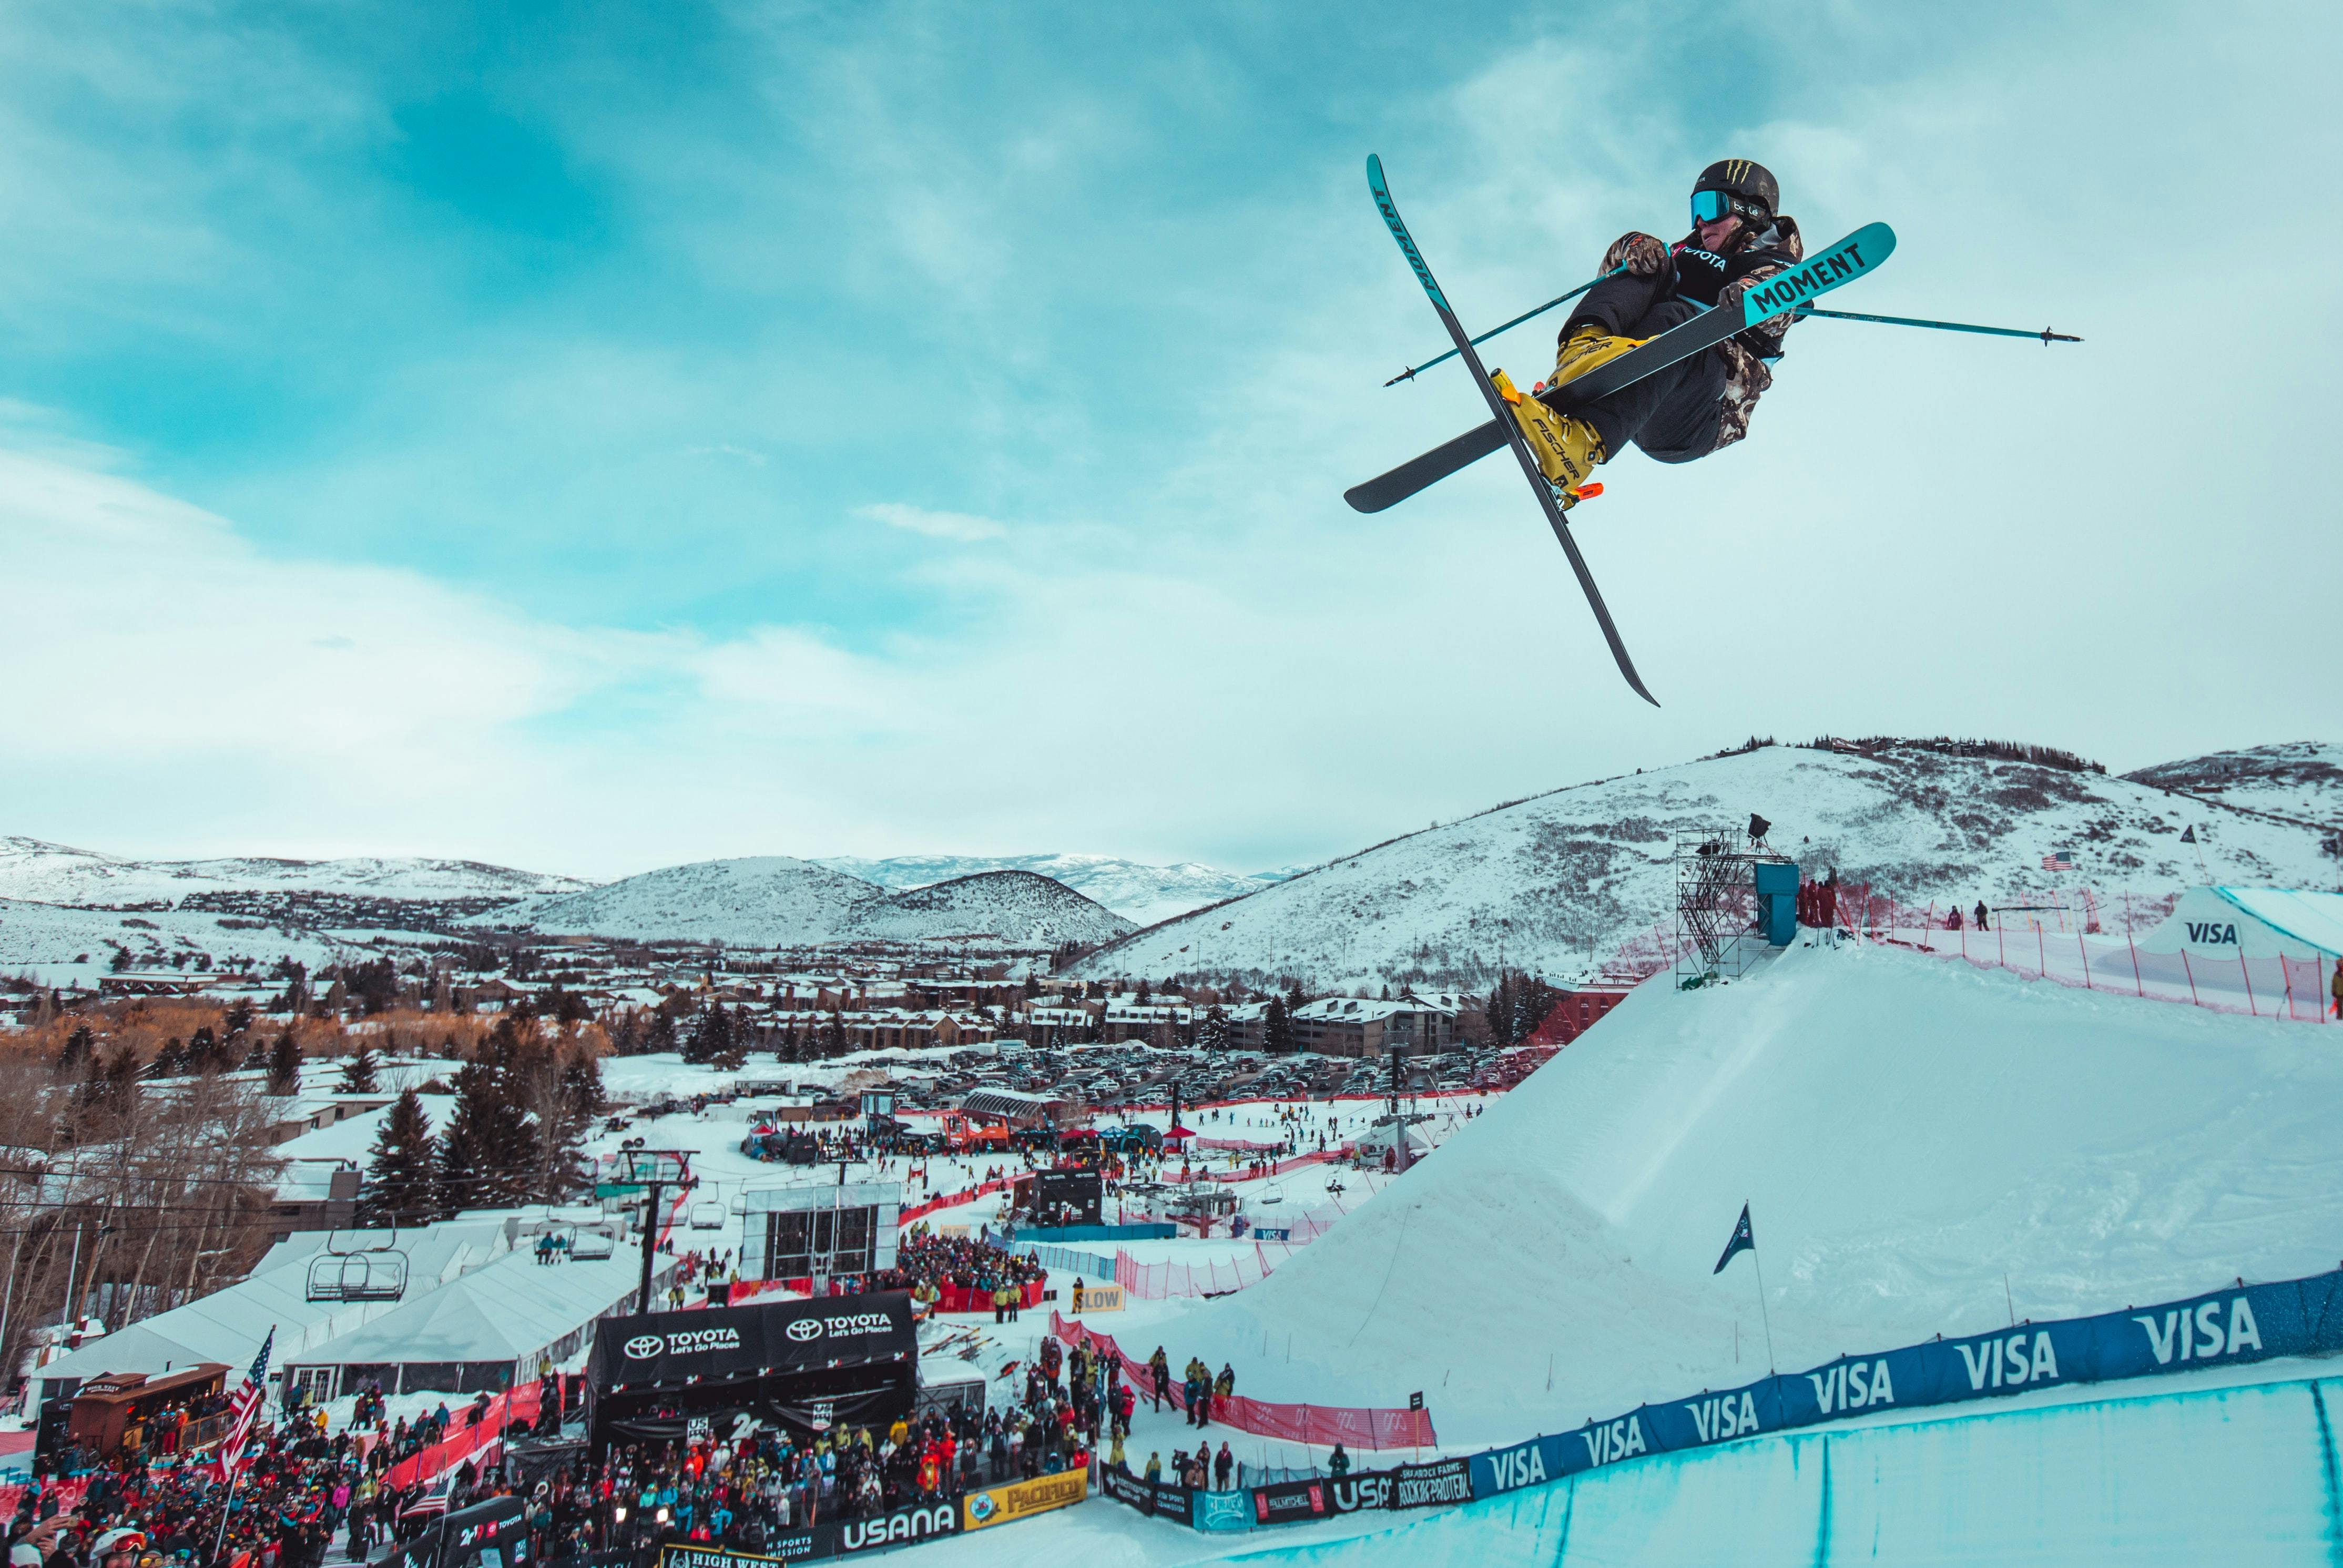 A skier doing a jump and grabbing his skis. There is a crowd in the background watching him. 